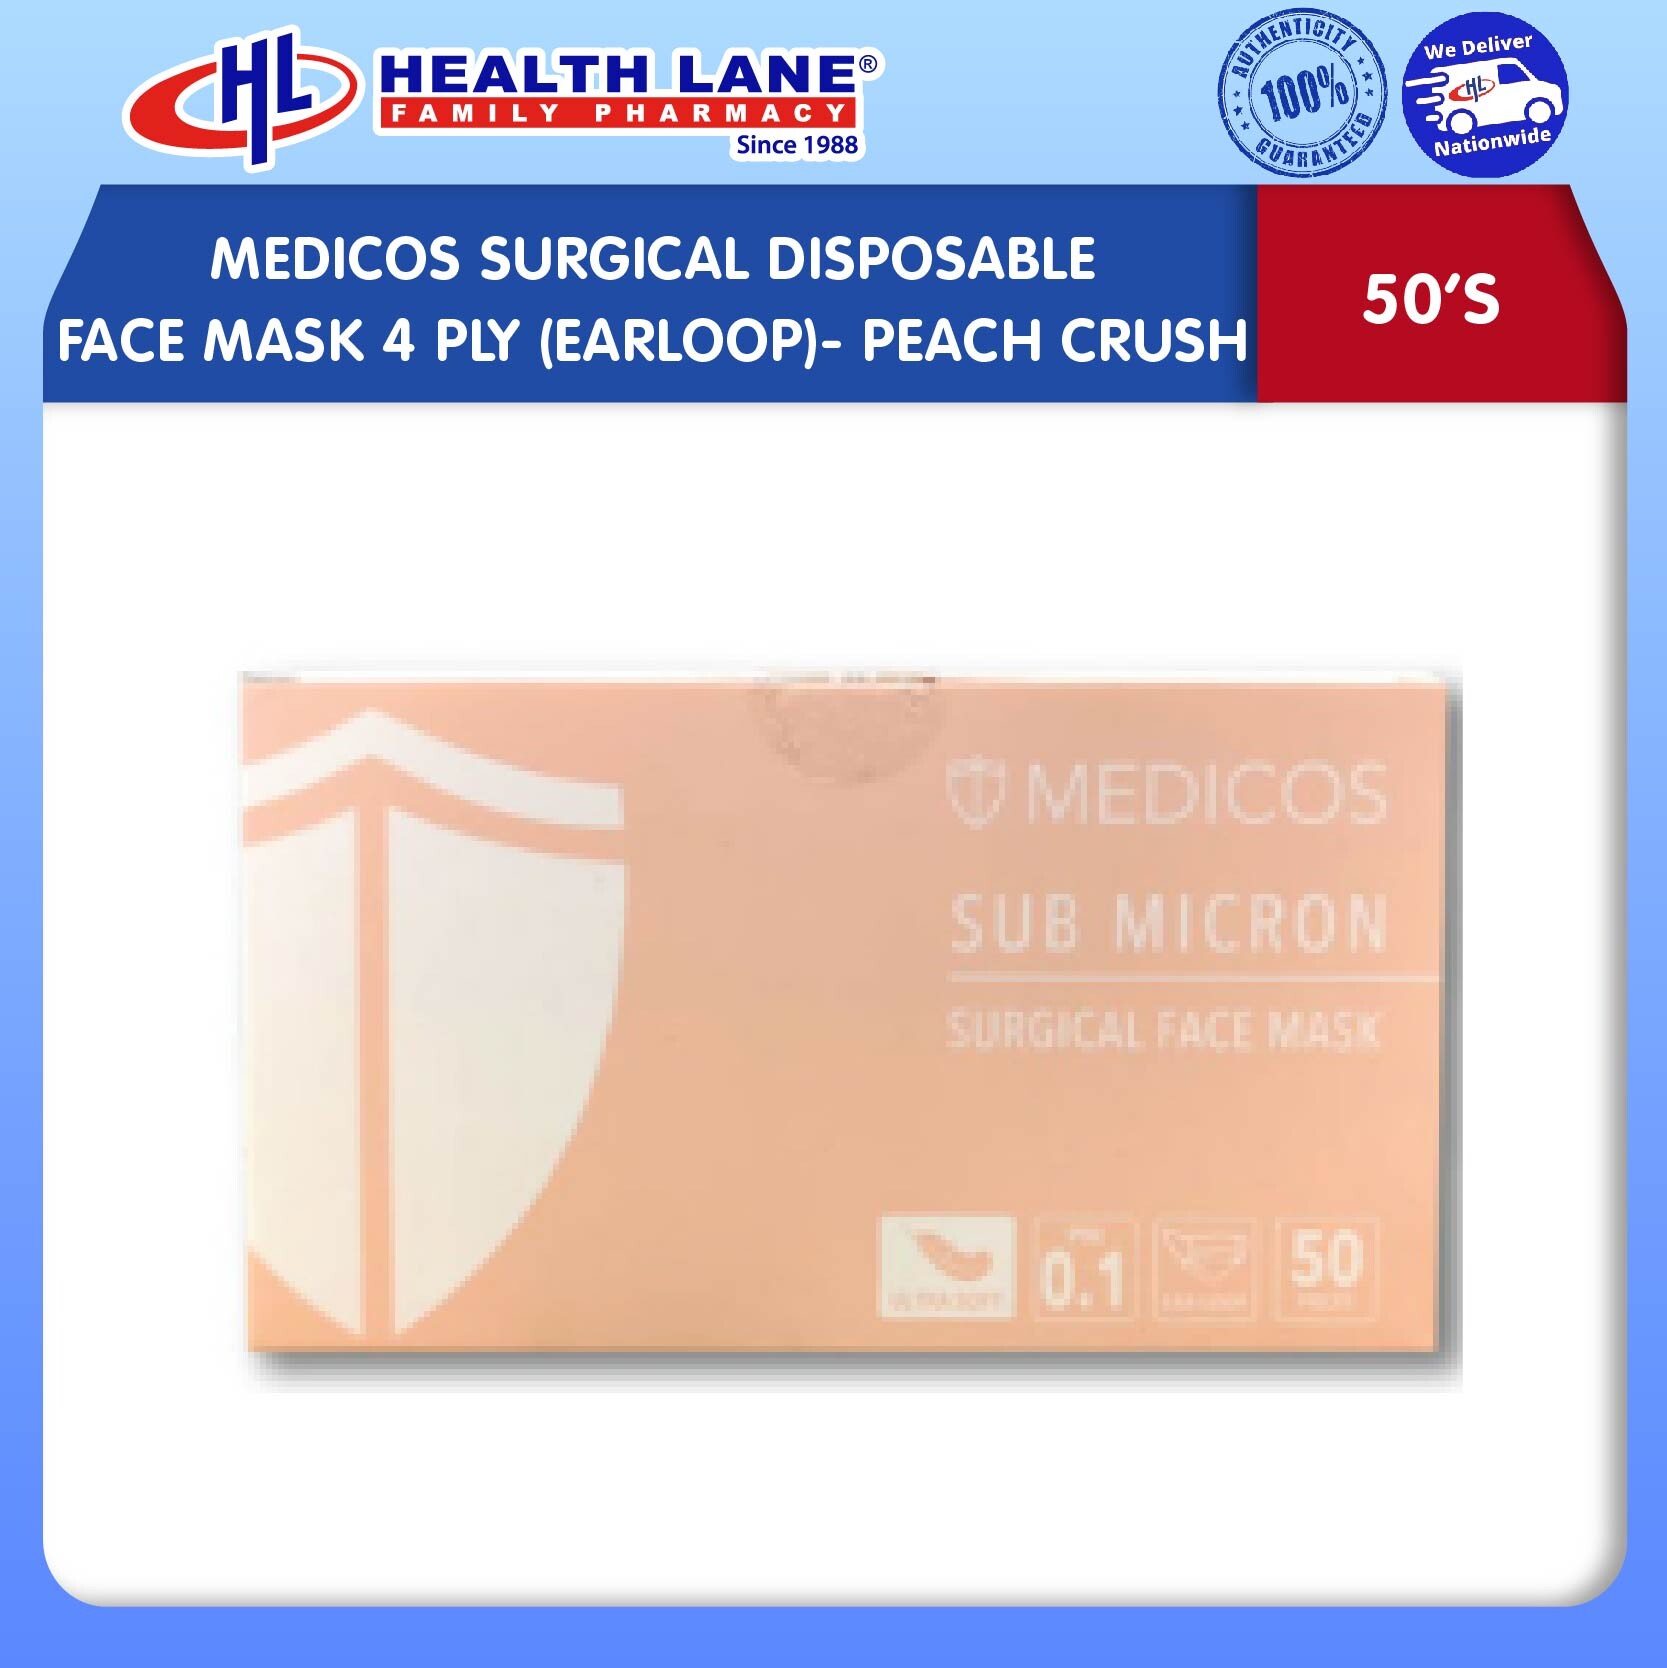 MEDICOS SURGICAL DISPOSABLE FACE MASK 4 PLY (EARLOOP)- PEACH CRUSH (50'S)